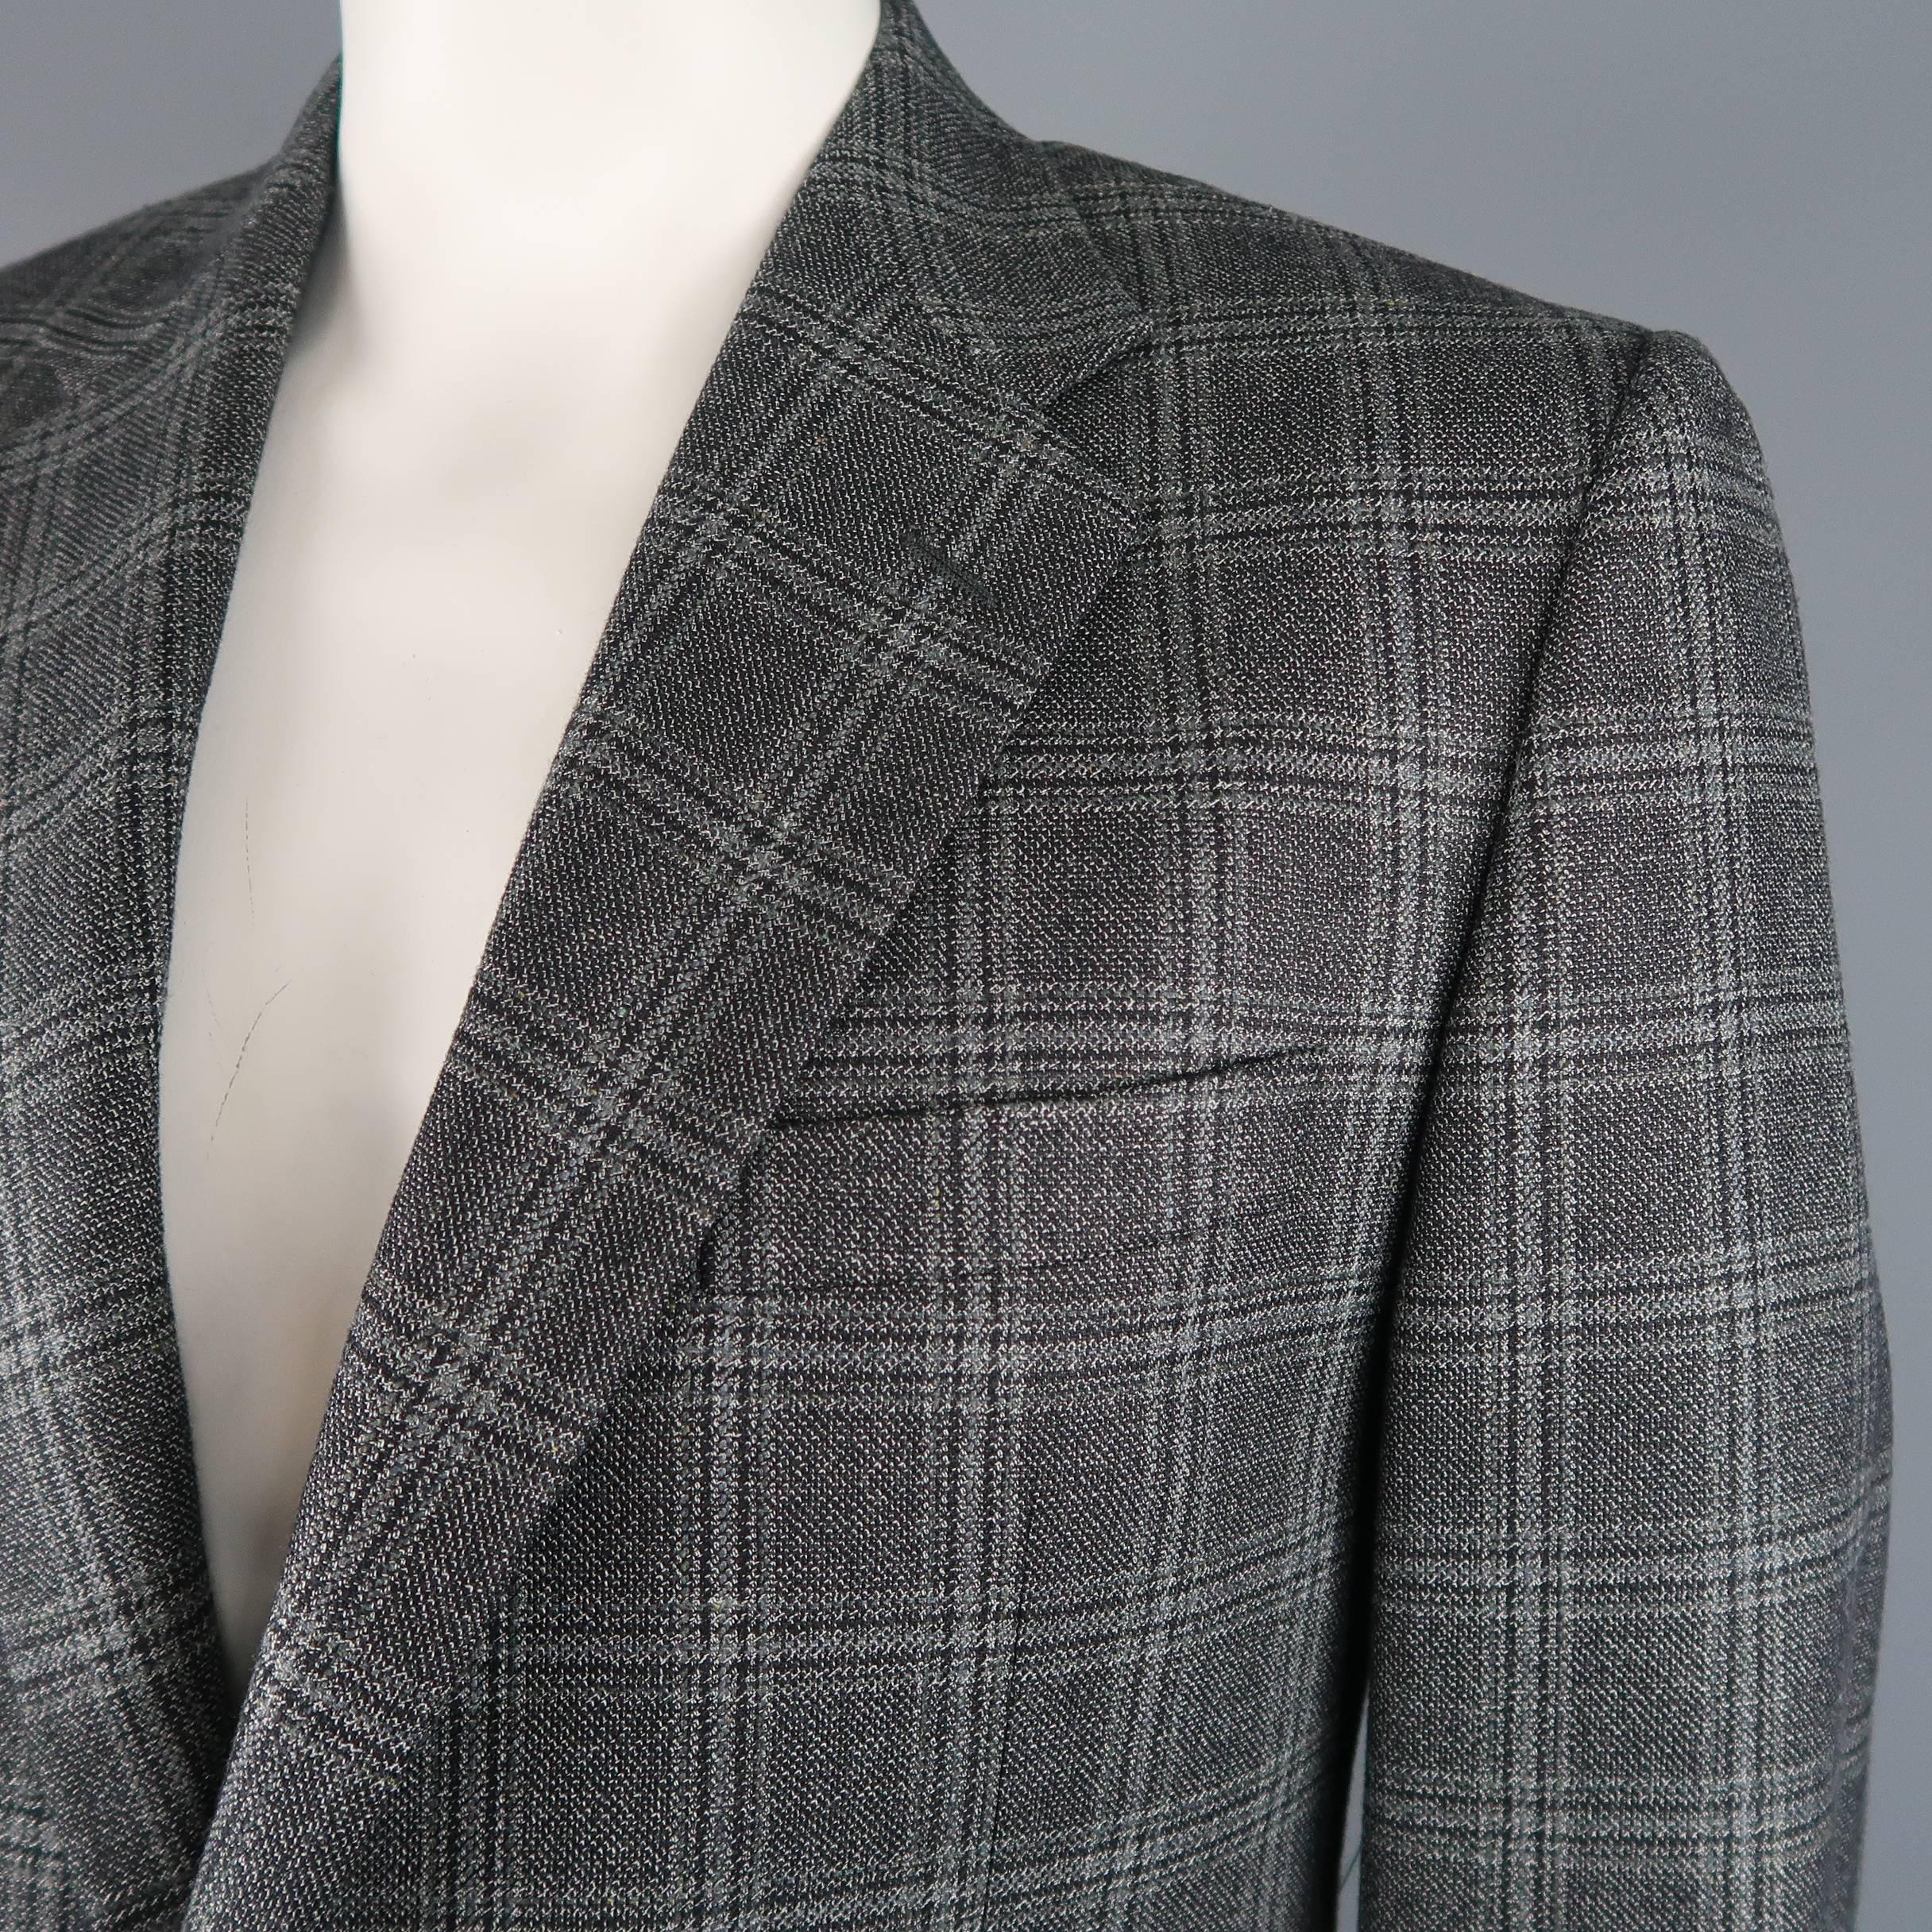 Single breasted HICKEY FREEMAN sport coat comes in dark gray plaid silk wool blend fabric with a notch lapel, two button front, and single vented back. Made in USA.
 
Excellent Pre-Owned Condition.
Marked: 42 Reg
 
Measurements:
 

    Shoulder: 18